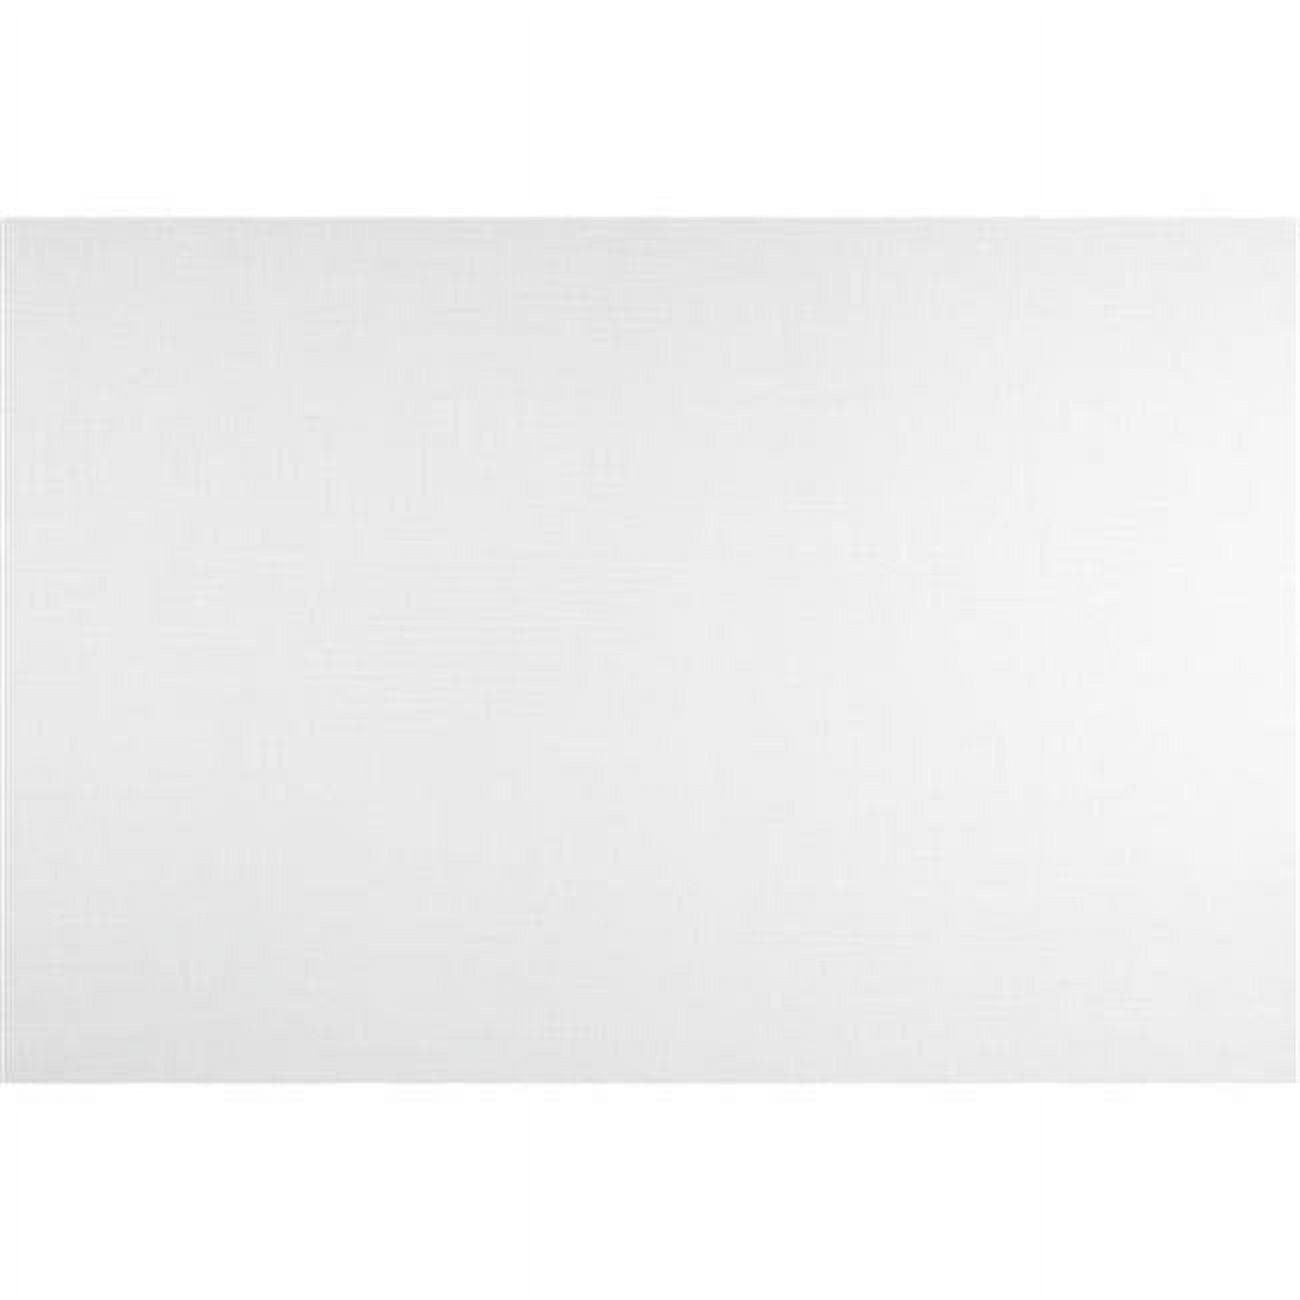 Picture of M-D Building Products 5020734 48 x 84 in. Aluminum Screen, Charcoal